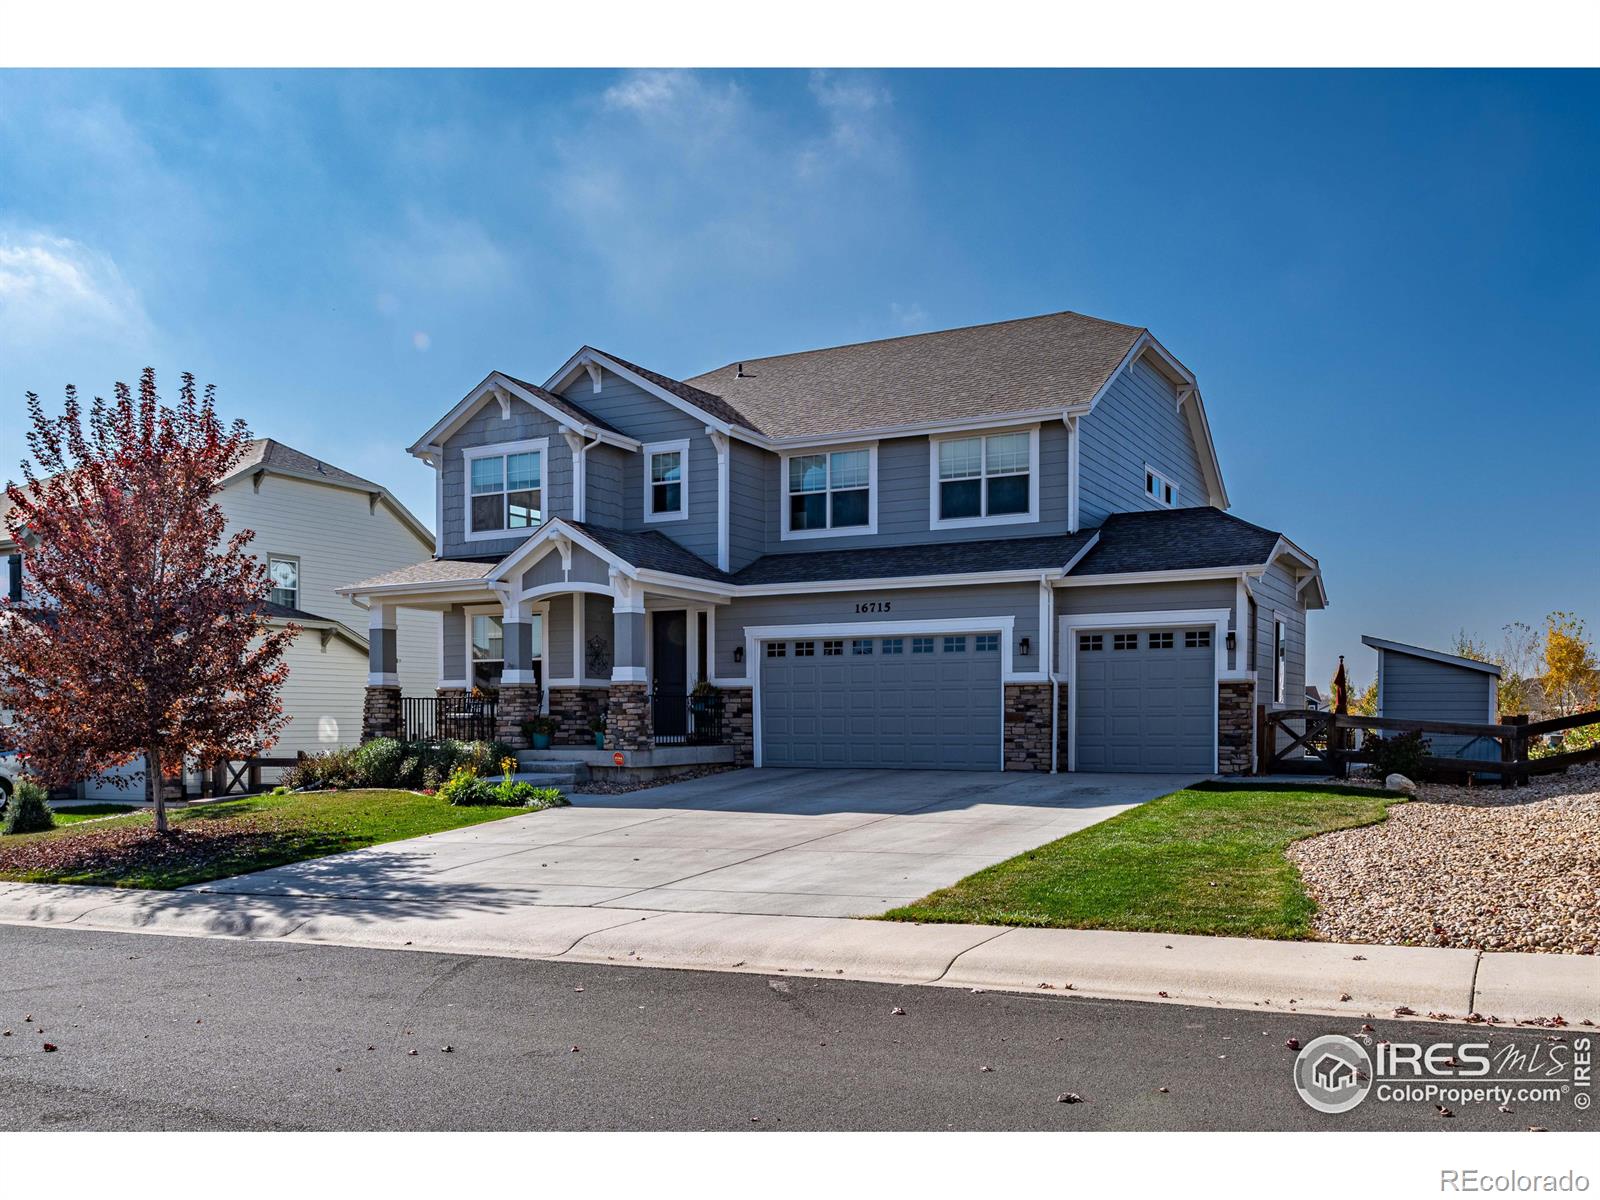 Report Image for 16715  Sanford Street,Mead, Colorado